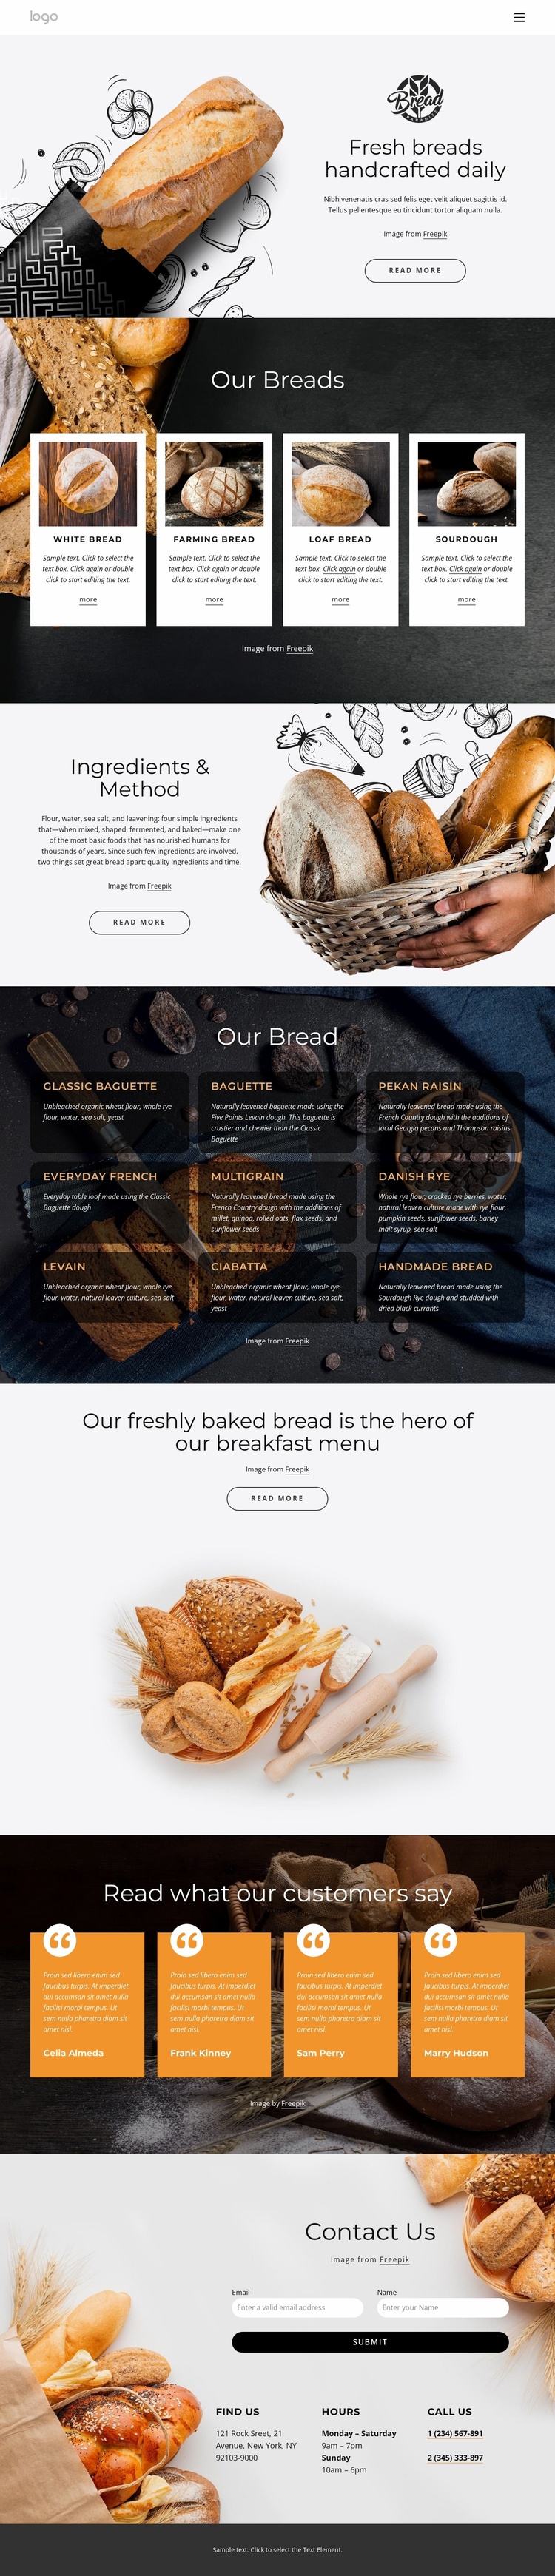 Fresh bread handcrafted every day Website Template